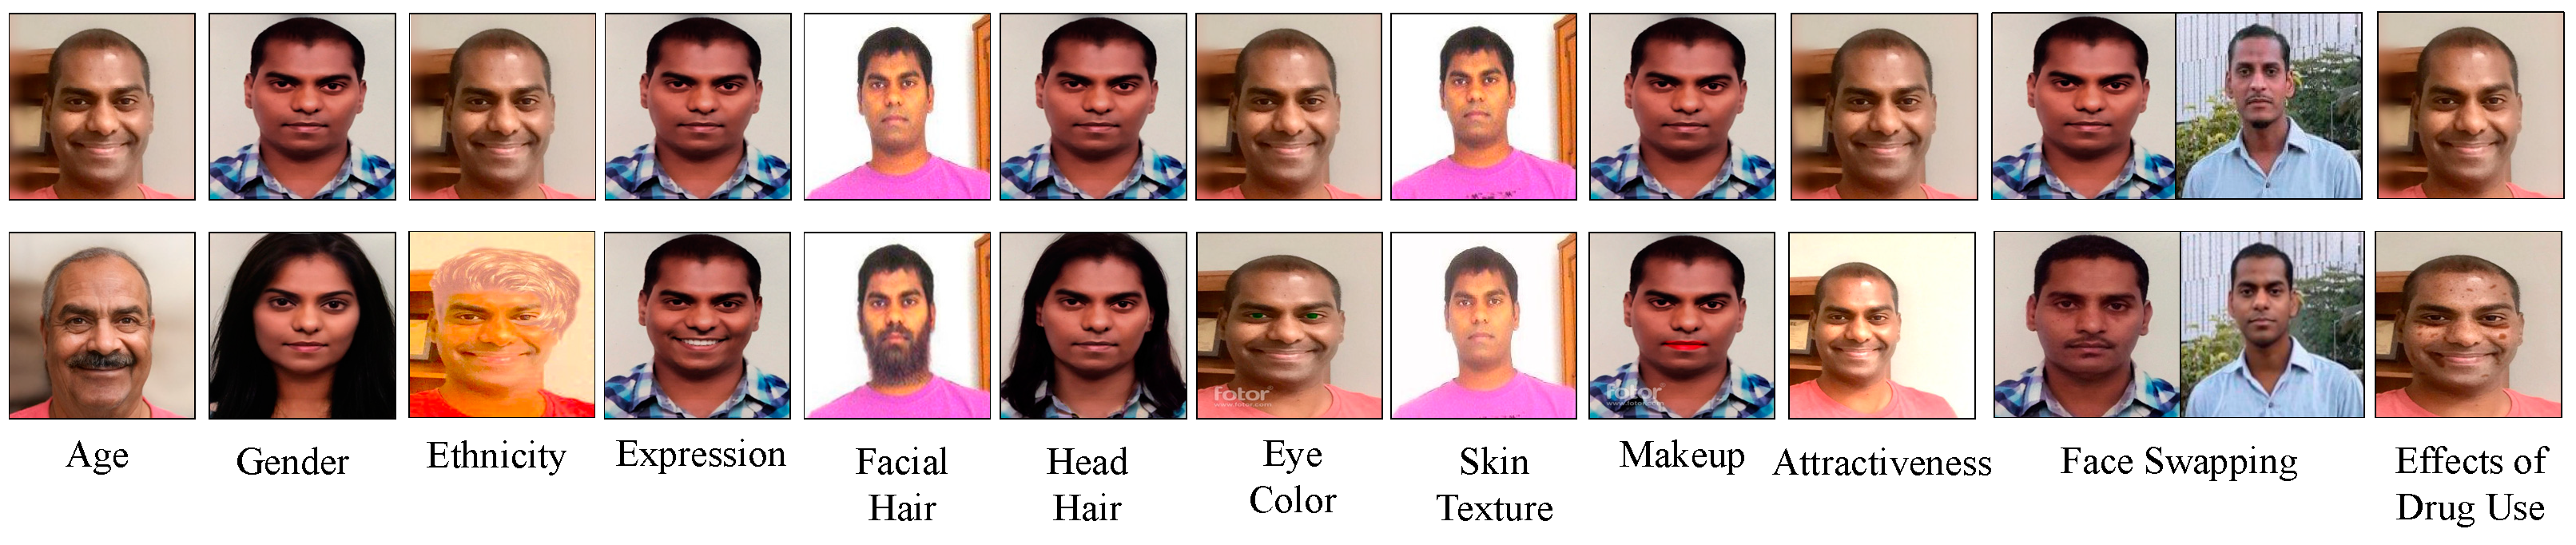 Figure 1. Examples of different face manipulations: original samples (first row) and manipulated samples (second row).